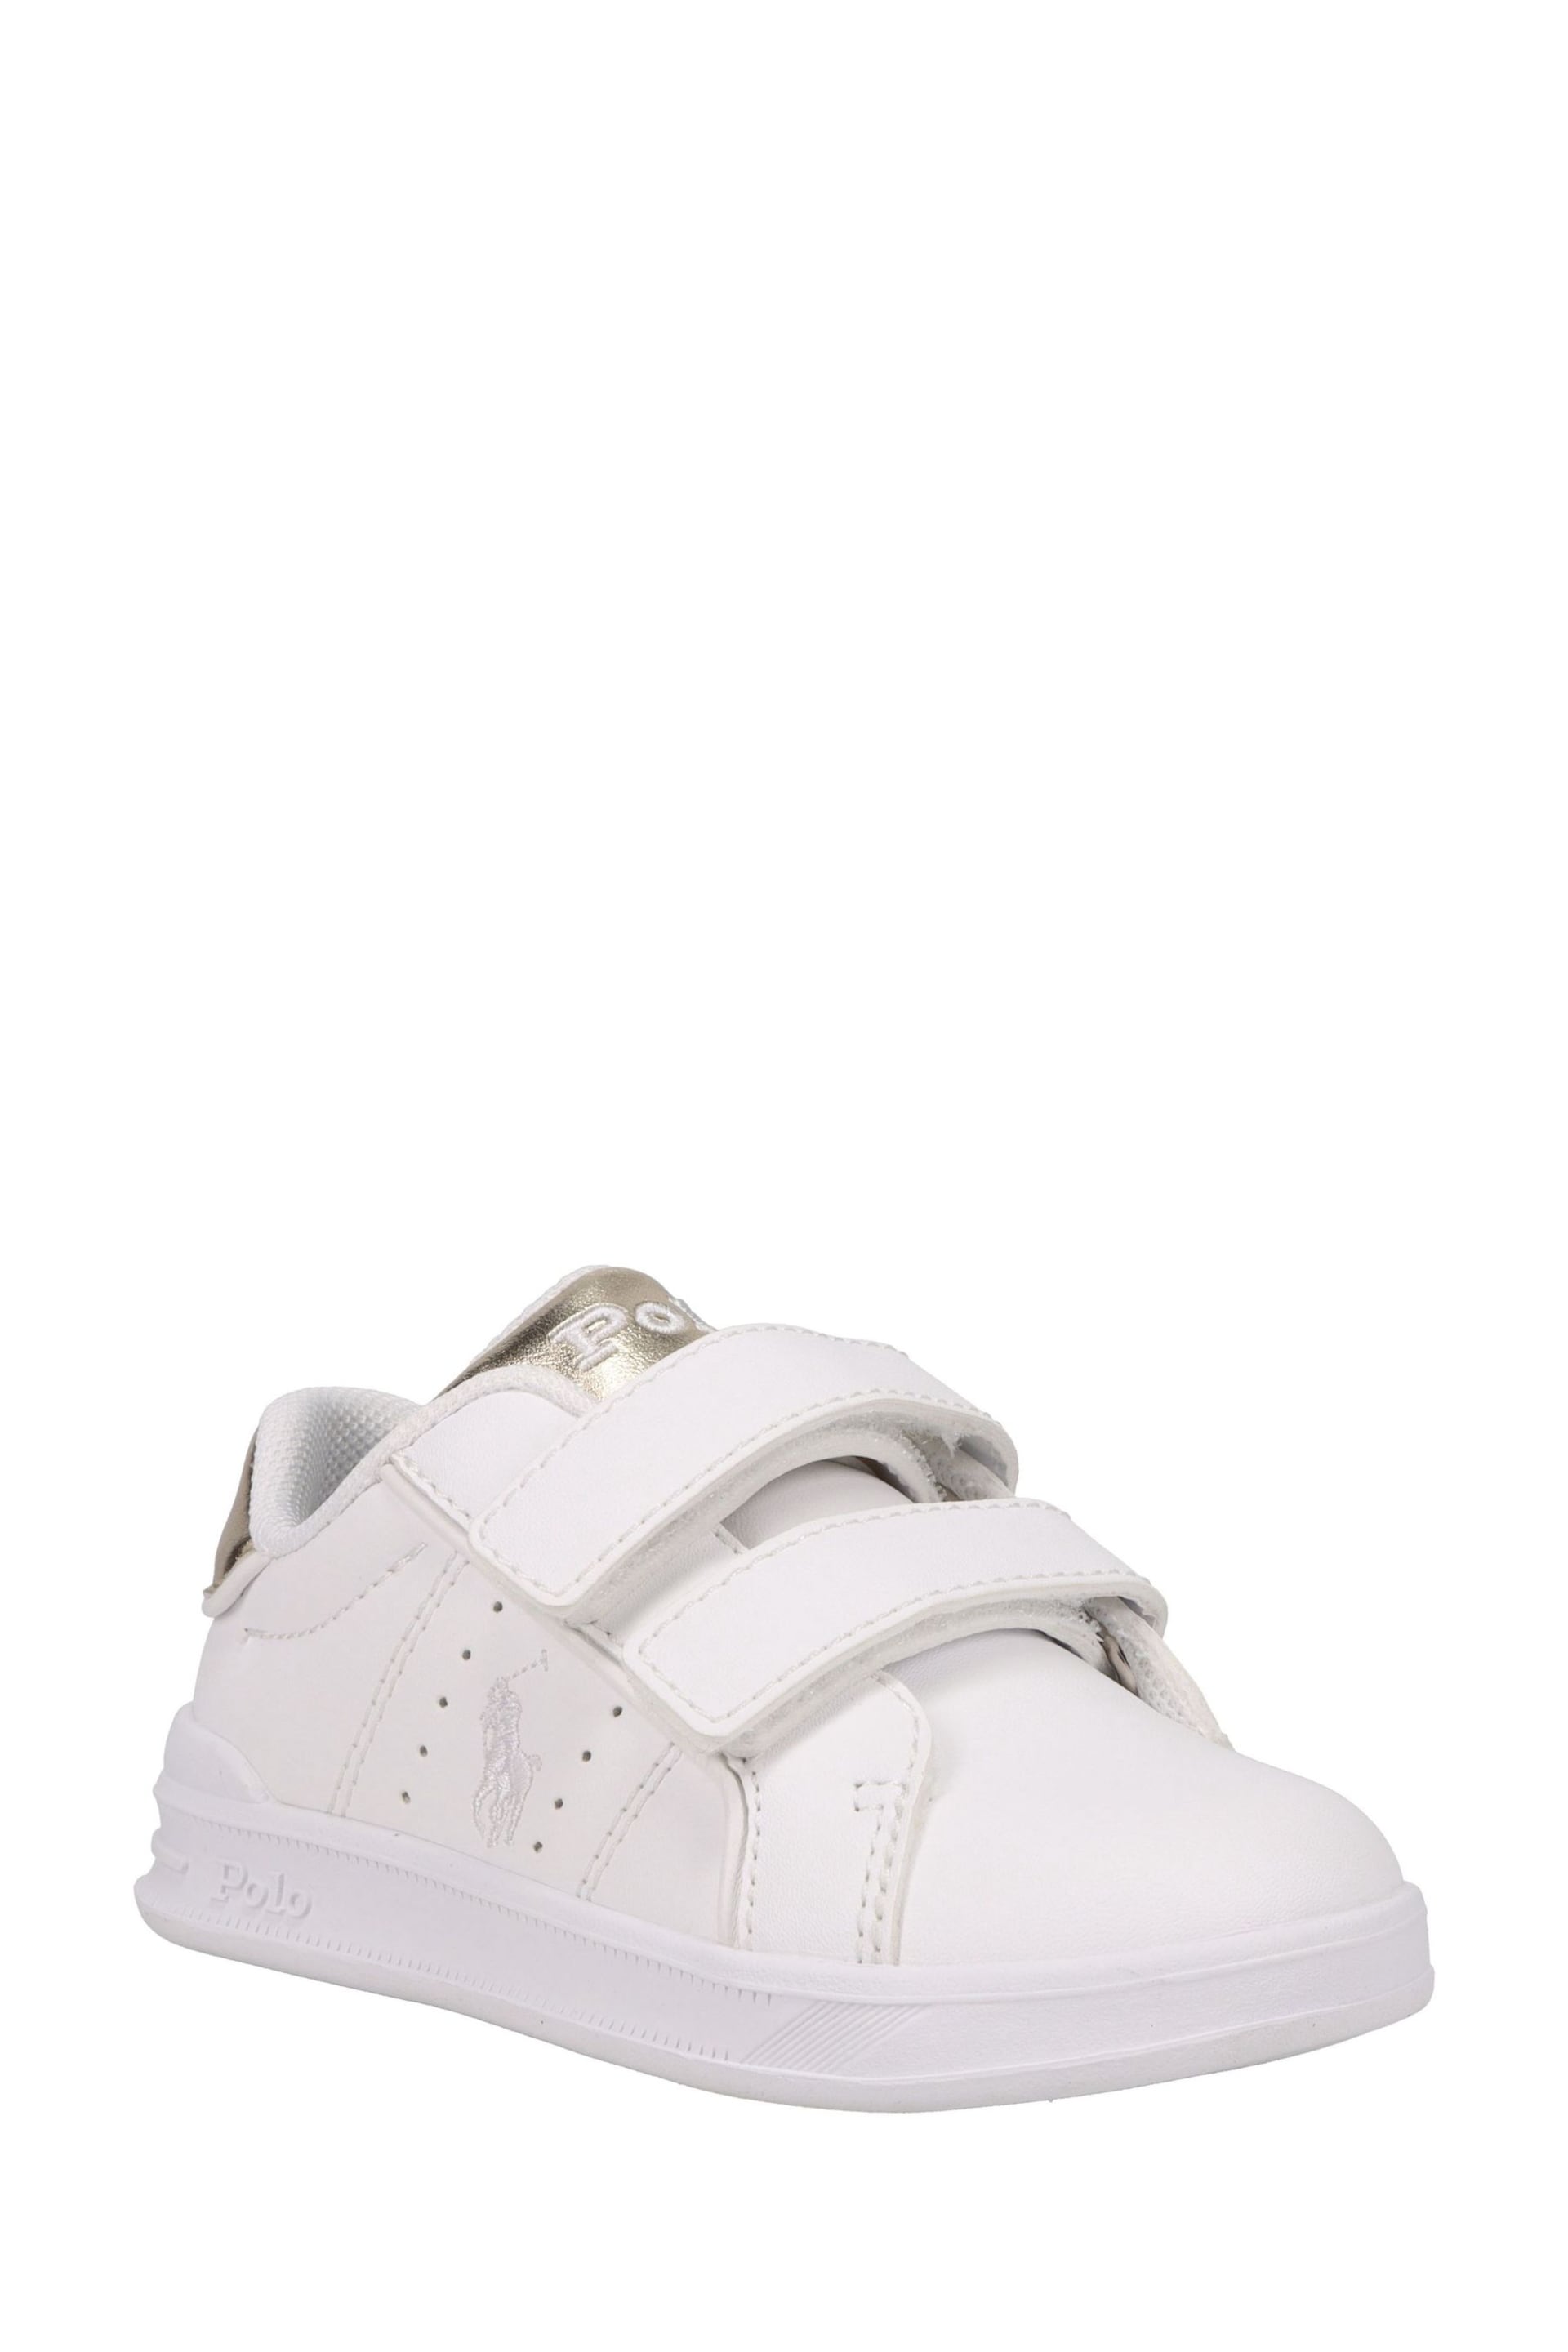 Polo Ralph Lauren White/Pink Heritage Court III Velcro Strap Trainers - Image 1 of 3